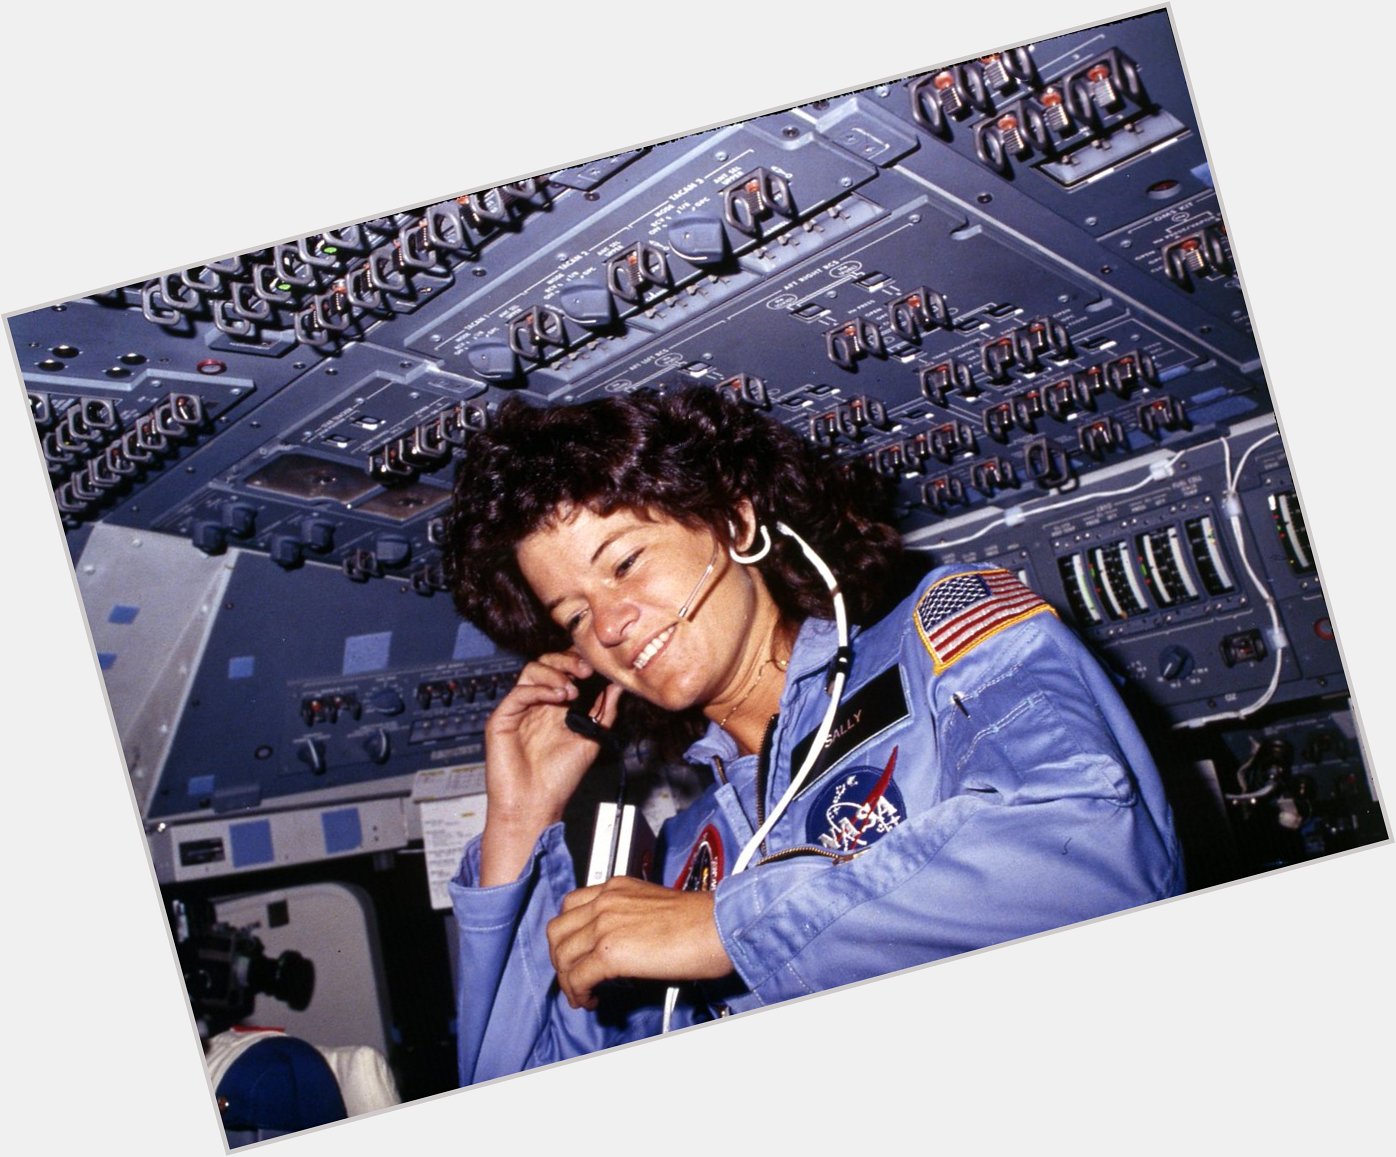 Happy Birthday Sally! On June 18, 1983, Sally Ride made history when she became the first American woman in space. 